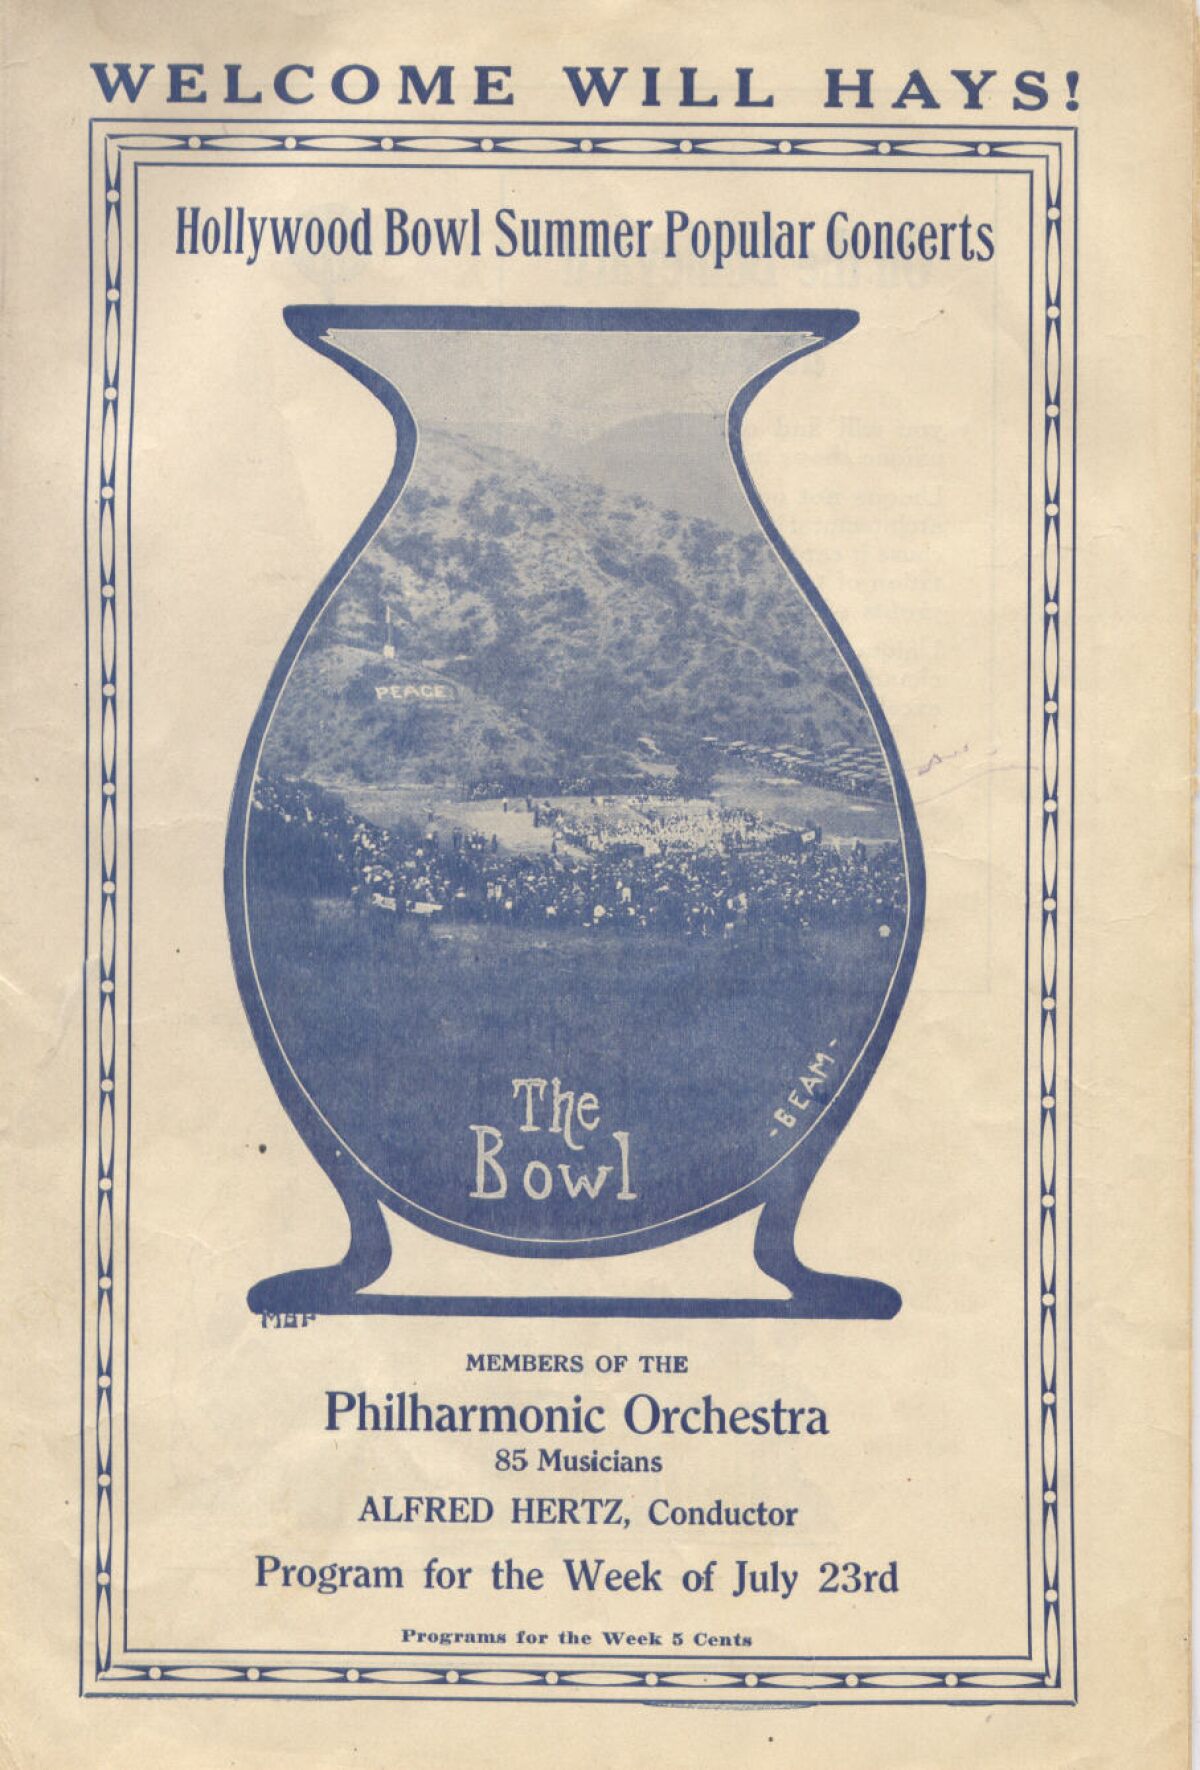 An early Hollywood Bowl summer concerts program.